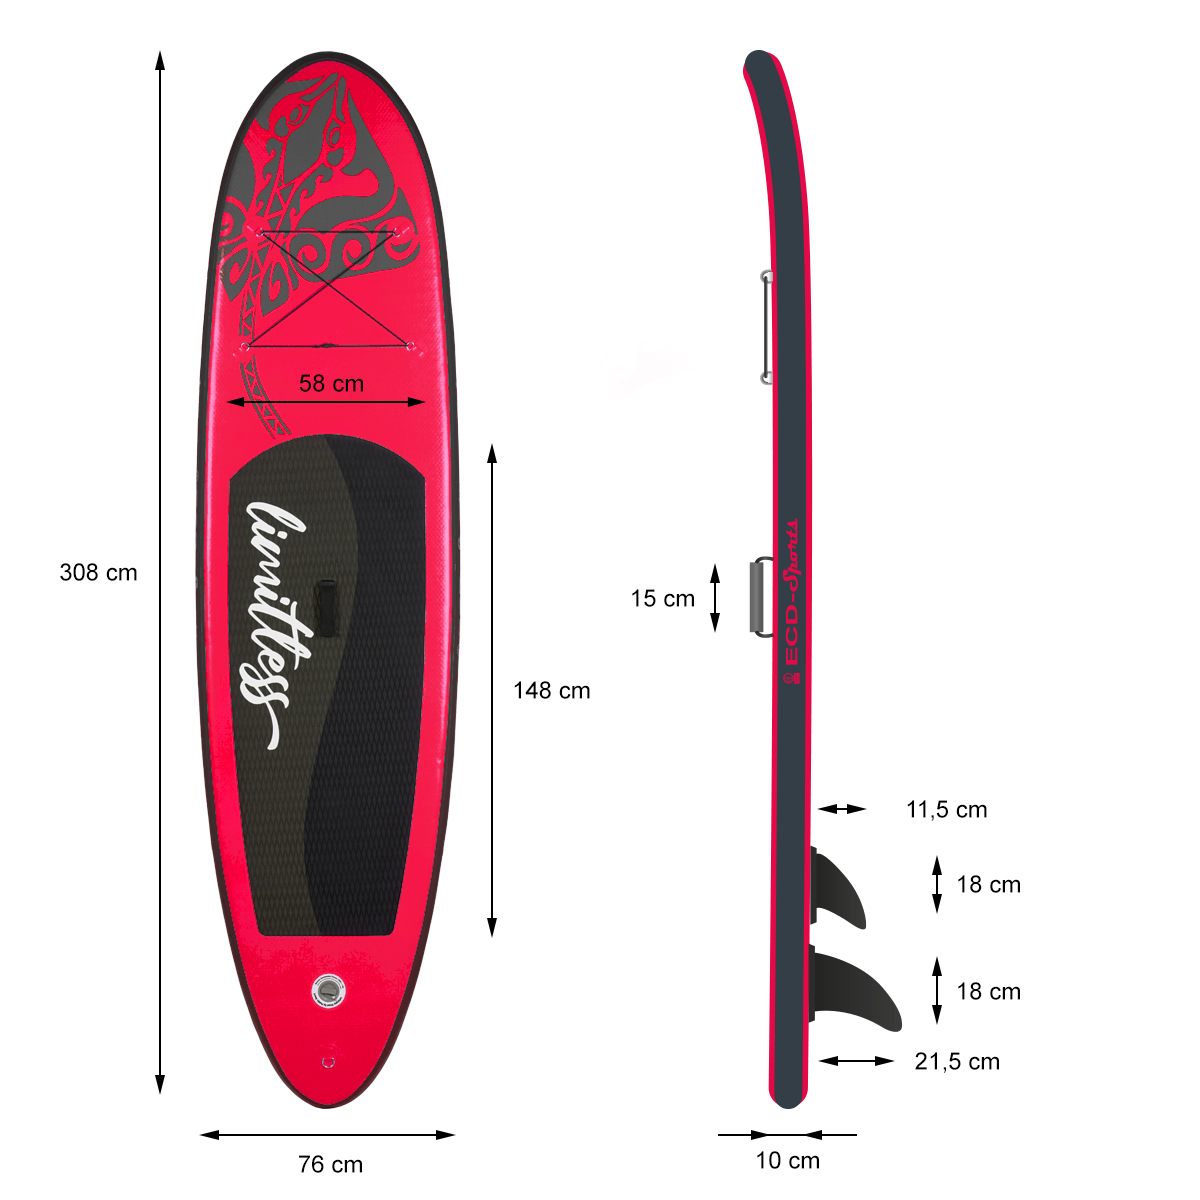 ECD-GERMANY Aufblasbares Stand Up Stand Up Red Paddle, Paddle Board